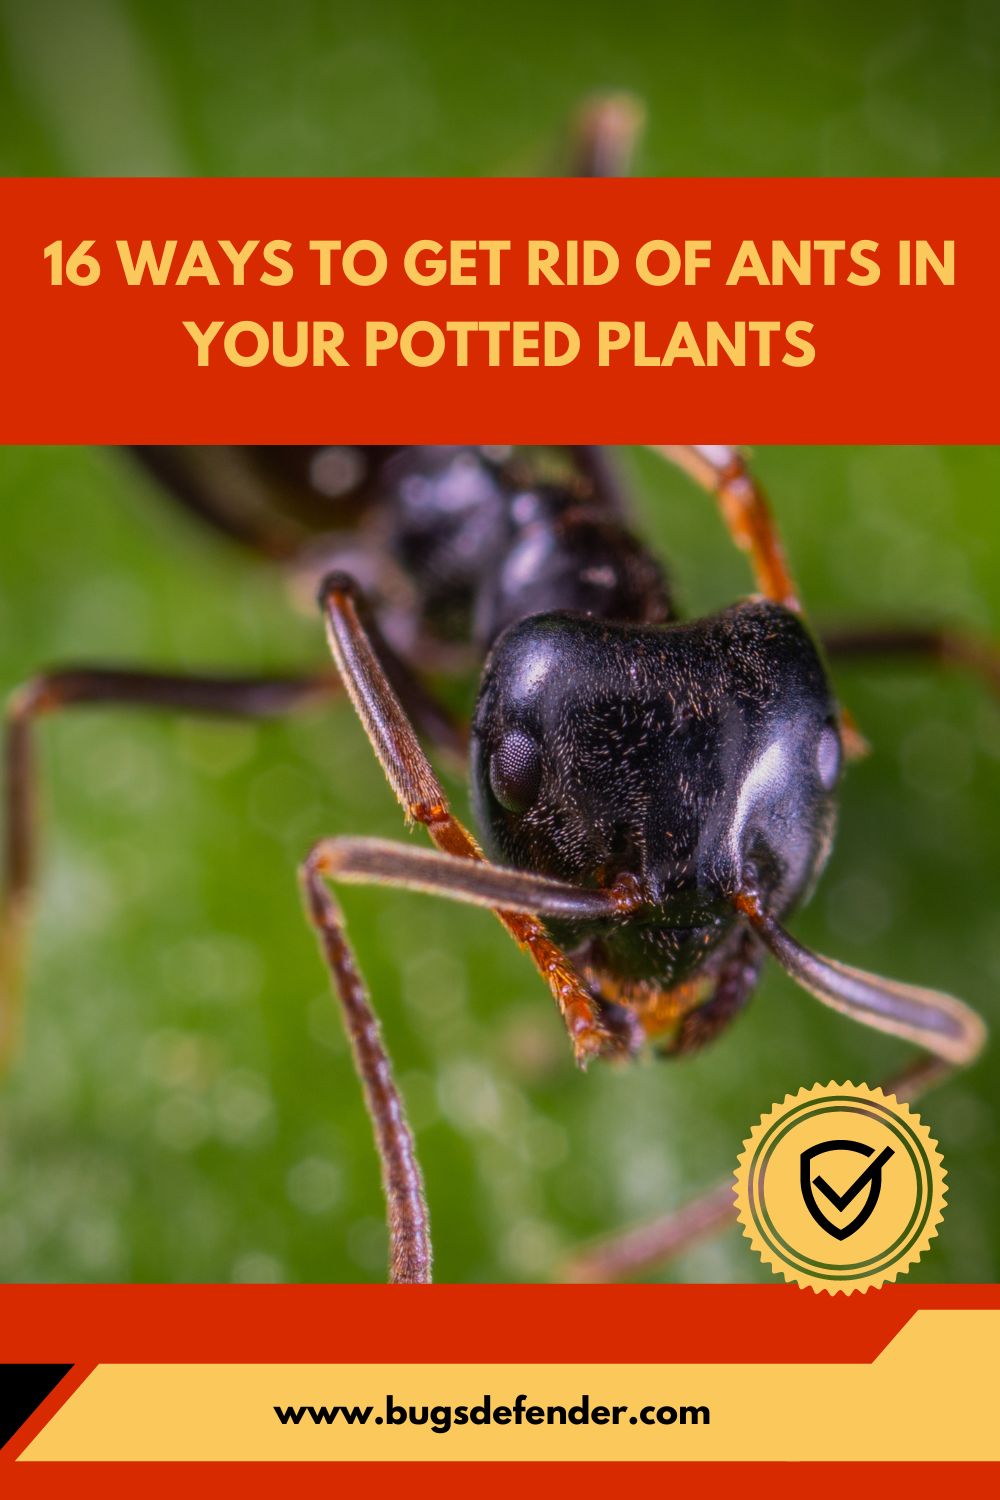 16 Ways to Get Rid of Ants in Your Potted Plants pin2